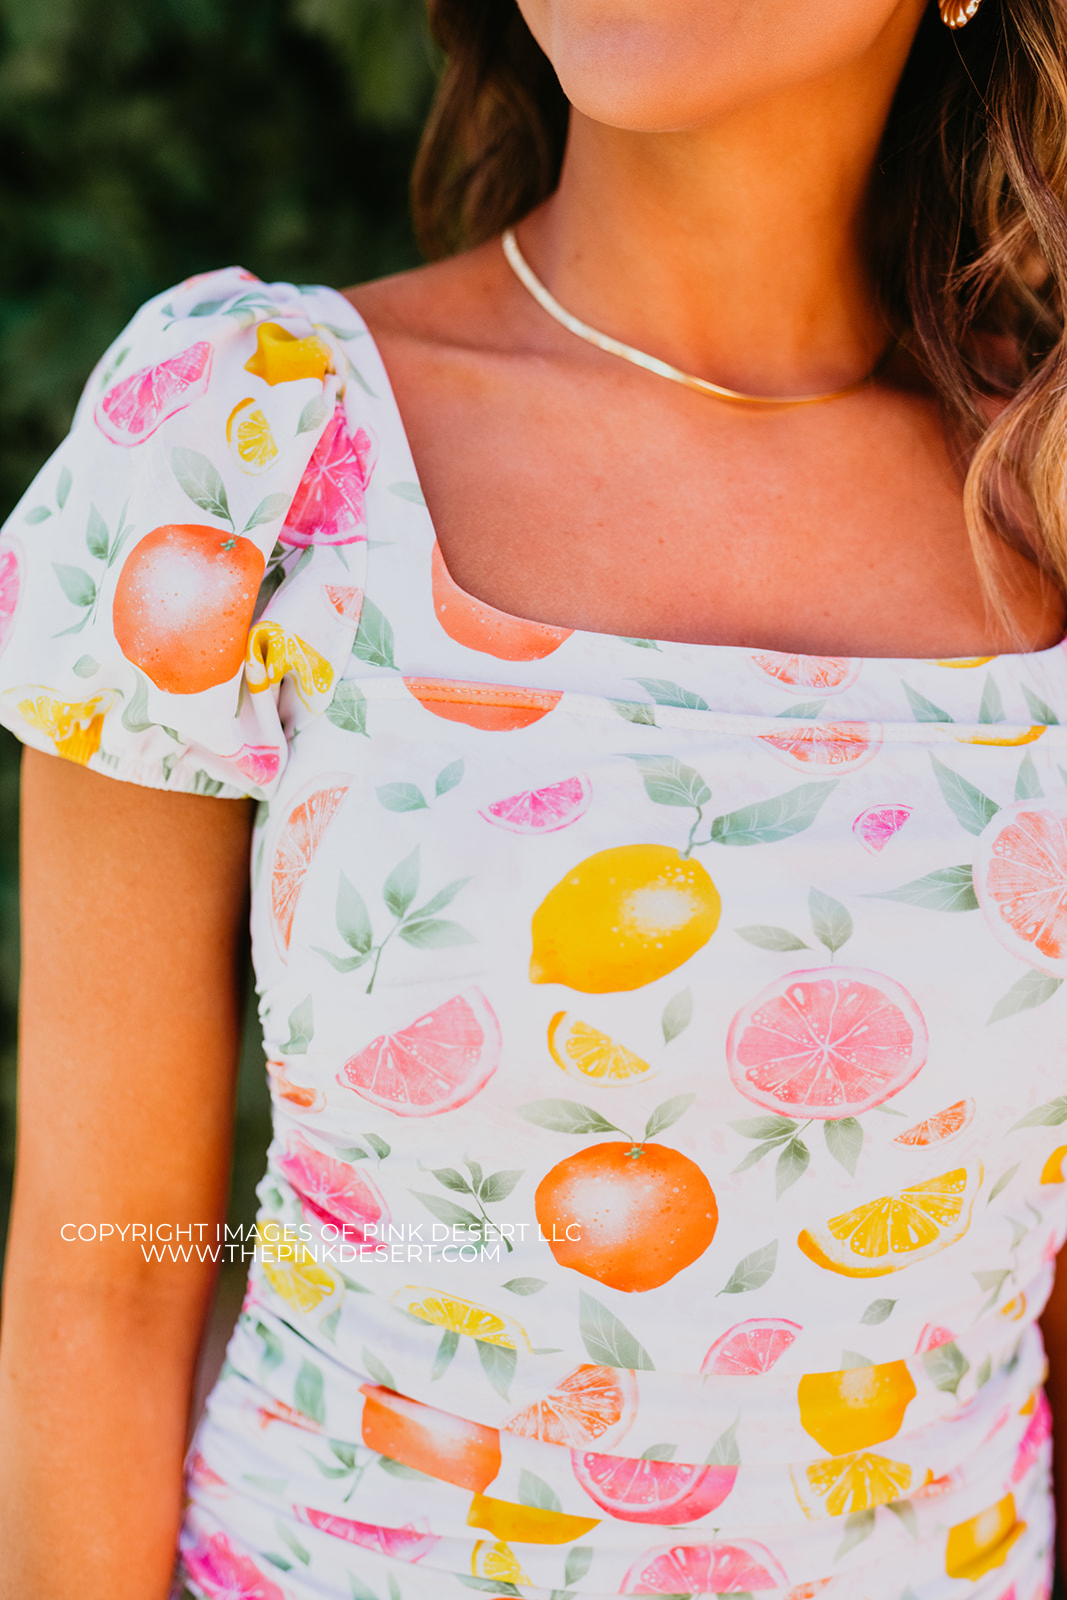 PUFF SLEEVE ONE PIECE IN CITRUS PRINT BY SASSY RED LIPSTICK X PINK DESERT